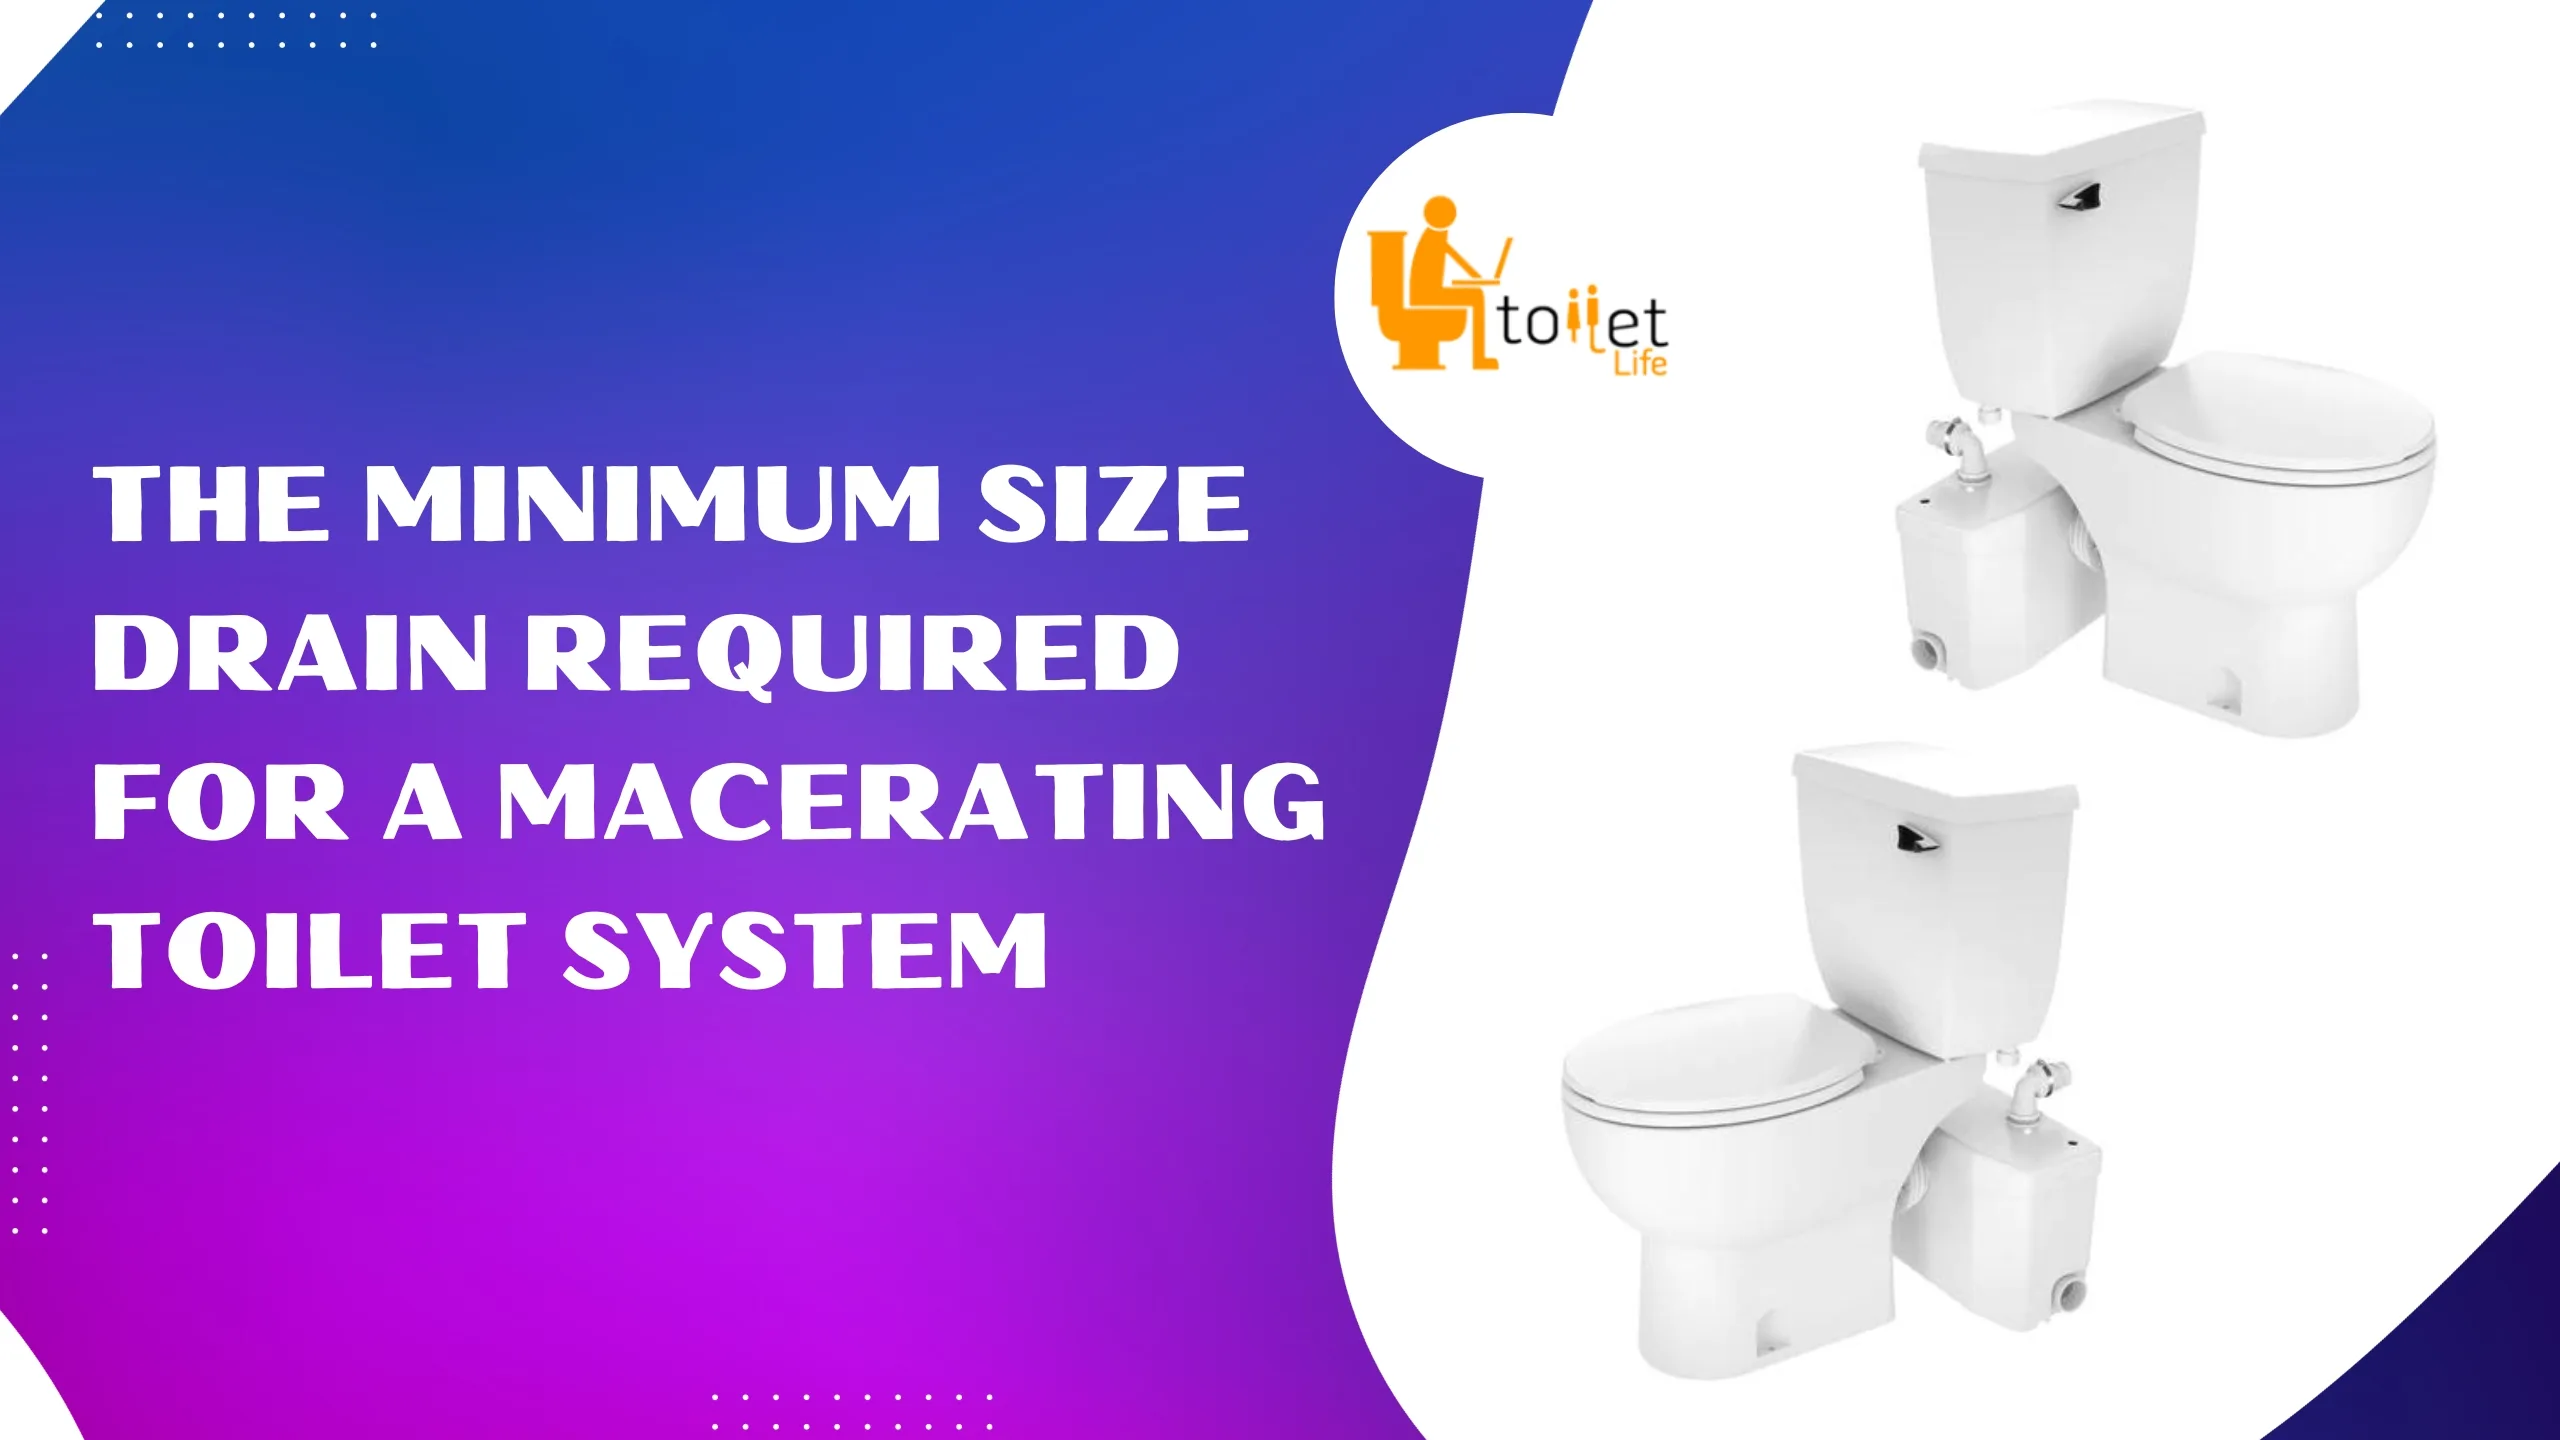 The Minimum Size Drain Required For A Macerating Toilet System